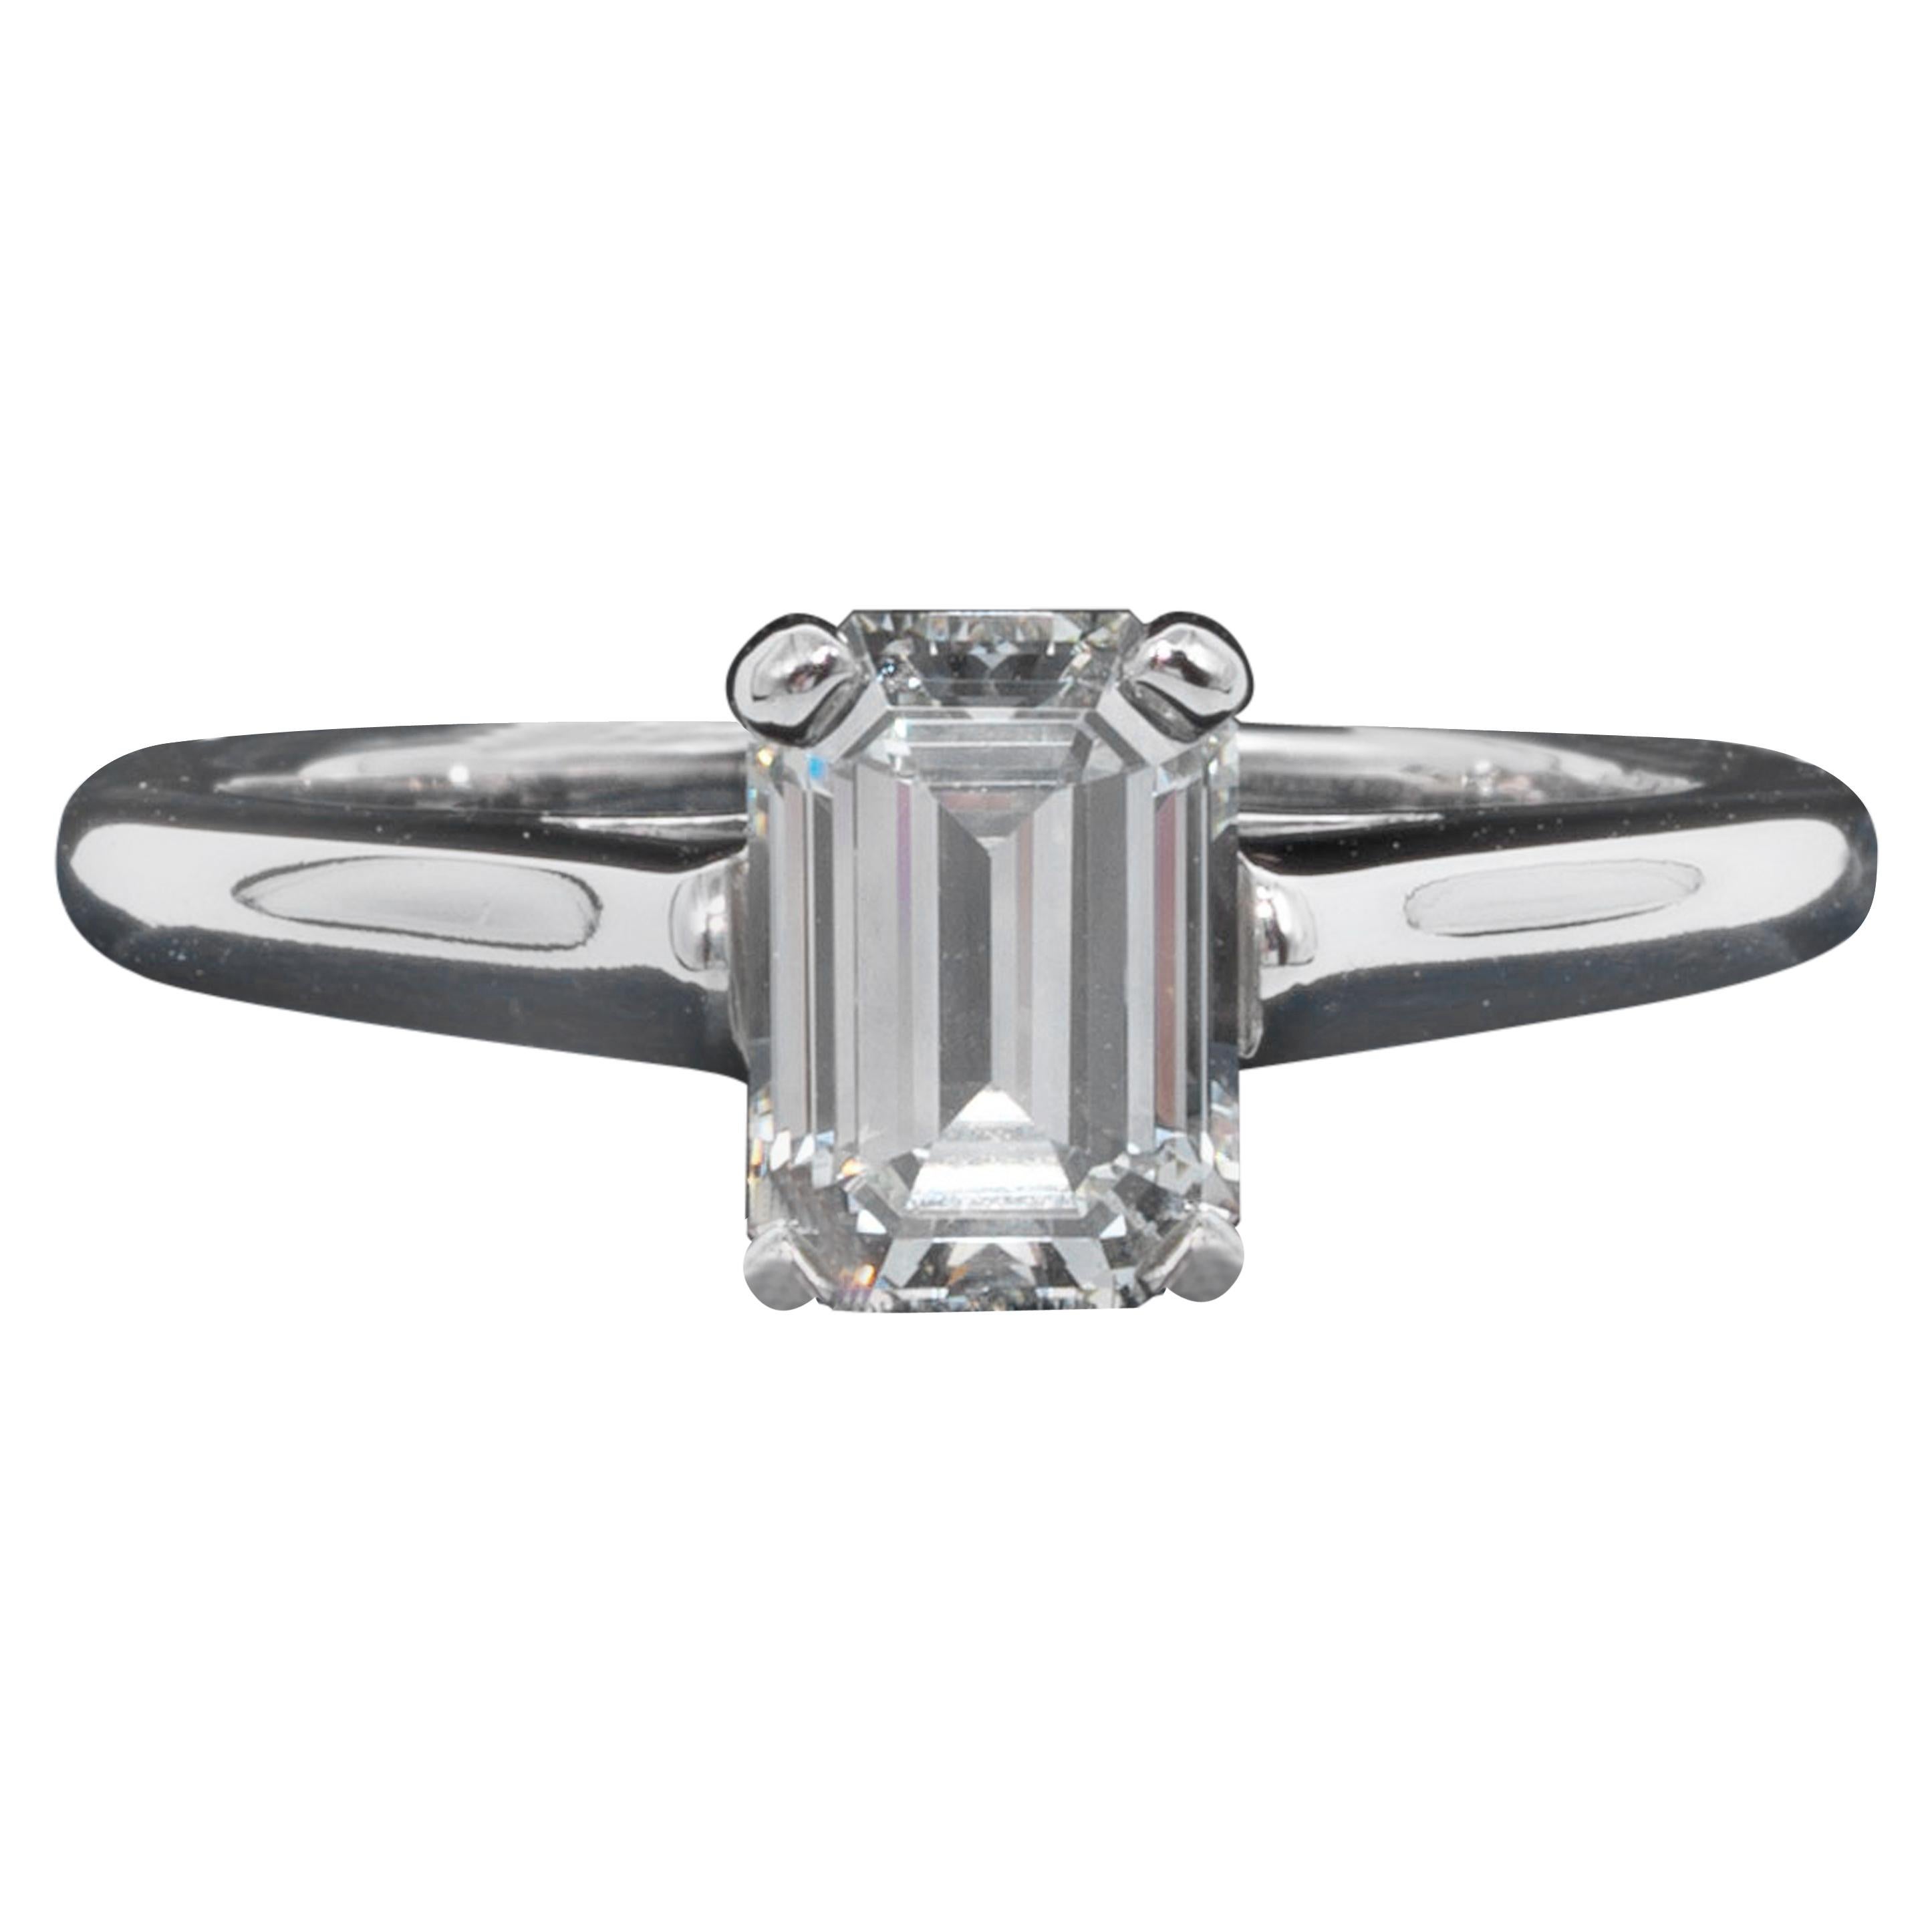 Tiffany & Co. Diamond Engagement Solitaire signed by Tiffany & Co. featuring a 1.07 ct Emerald Cut Center, graded by Tiffany,  I color , and VS2 Clarity.
In Platinum
Includes Original Tiffany Certificate and Box
Diamond registration #: D11247

Ring